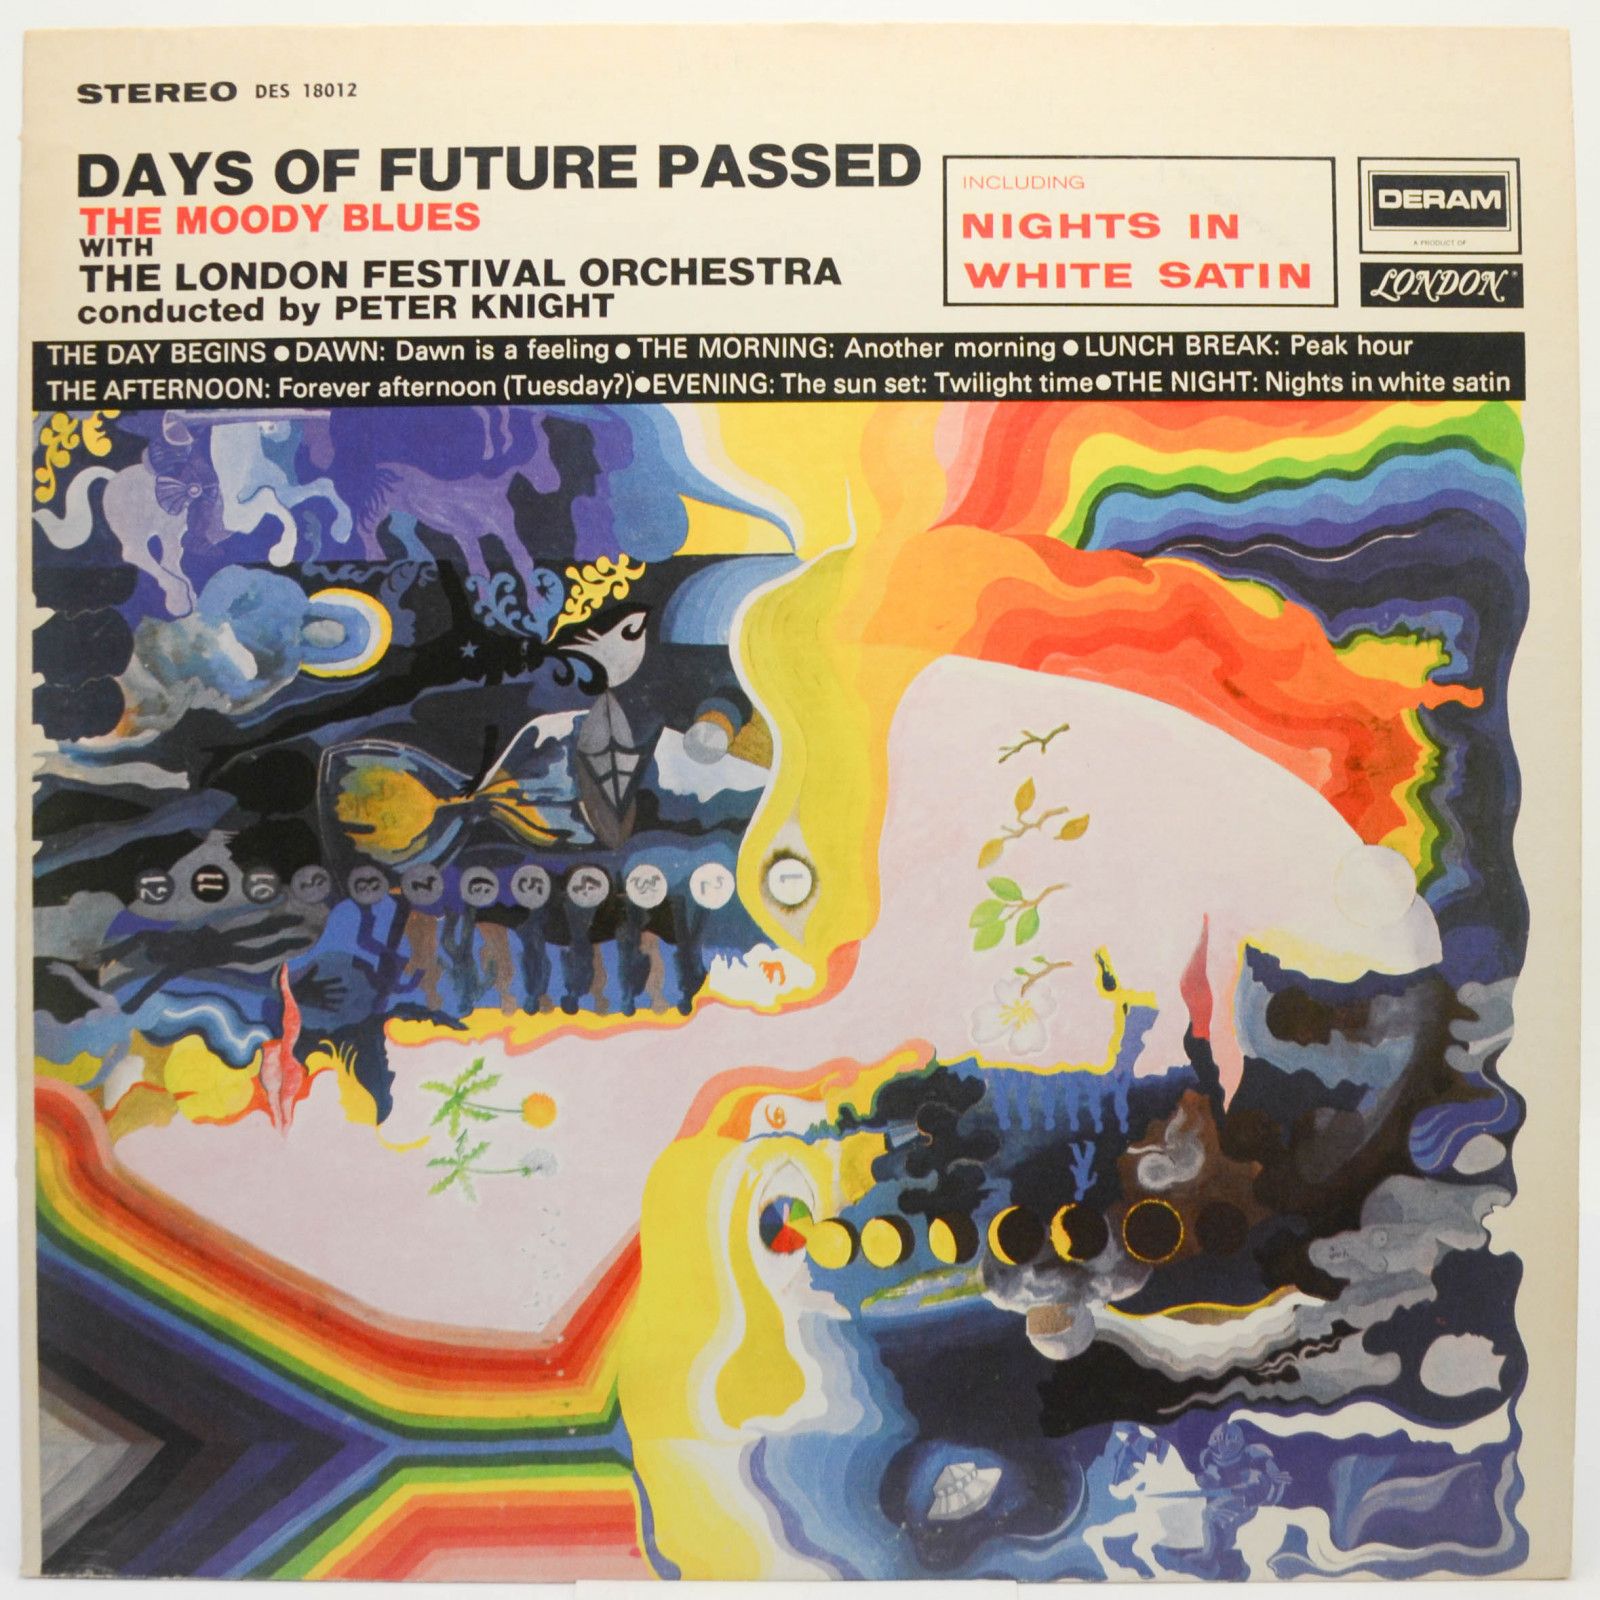 Moody Blues With The London Festival Orchestra Conducted By Peter Knight — Days Of Future Passed (USA), 1967